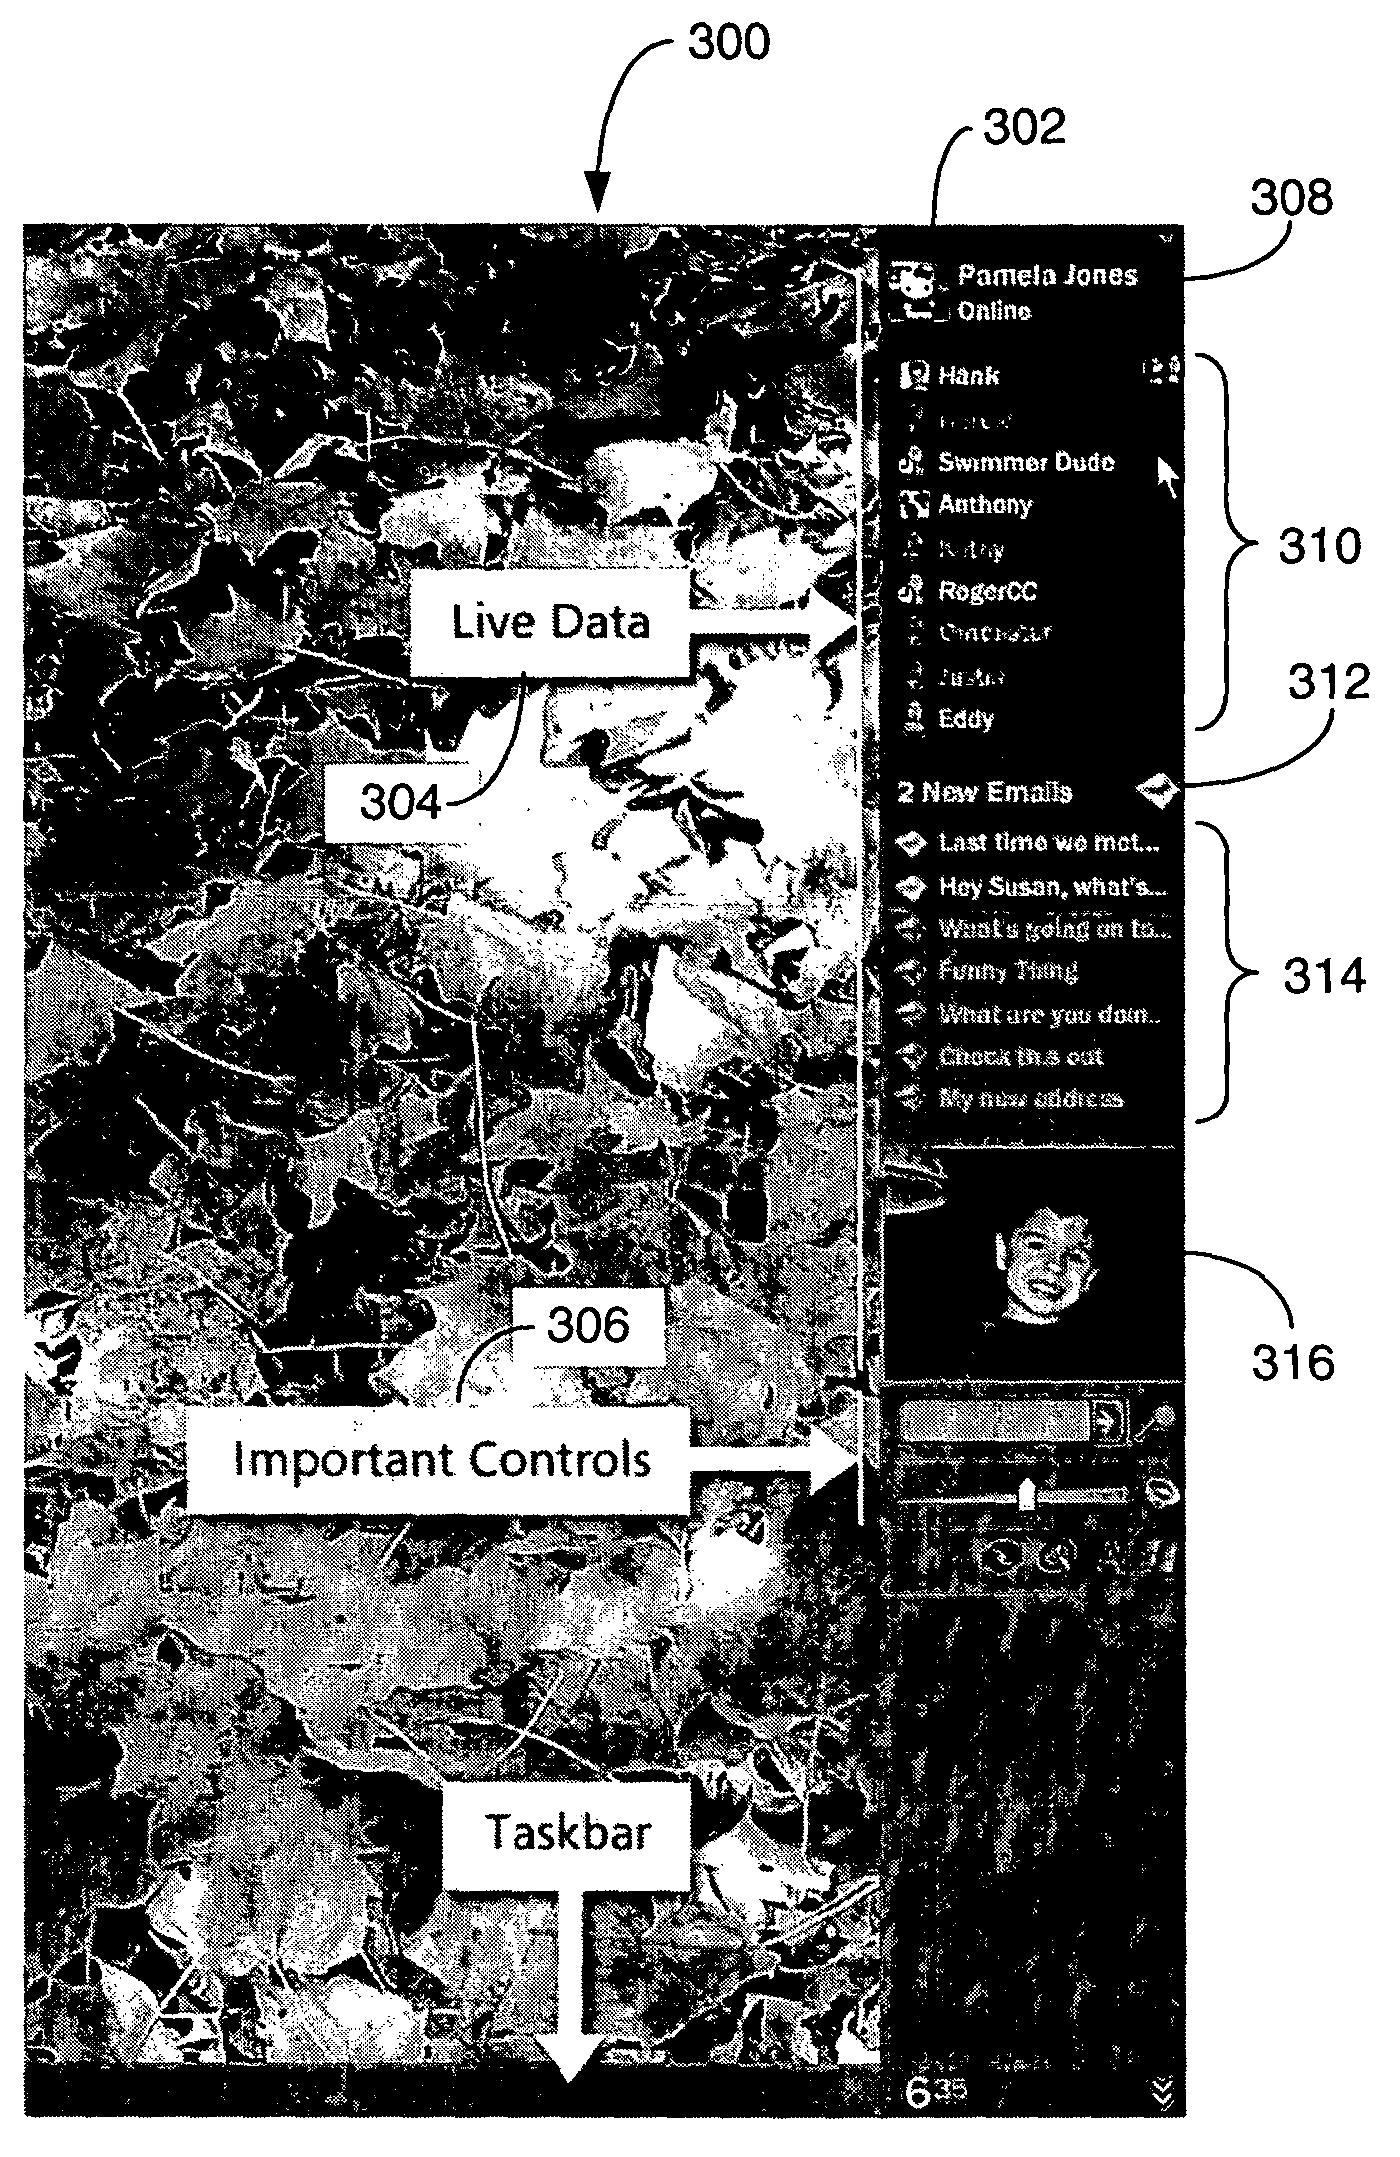 System and method for providing rich minimized applications